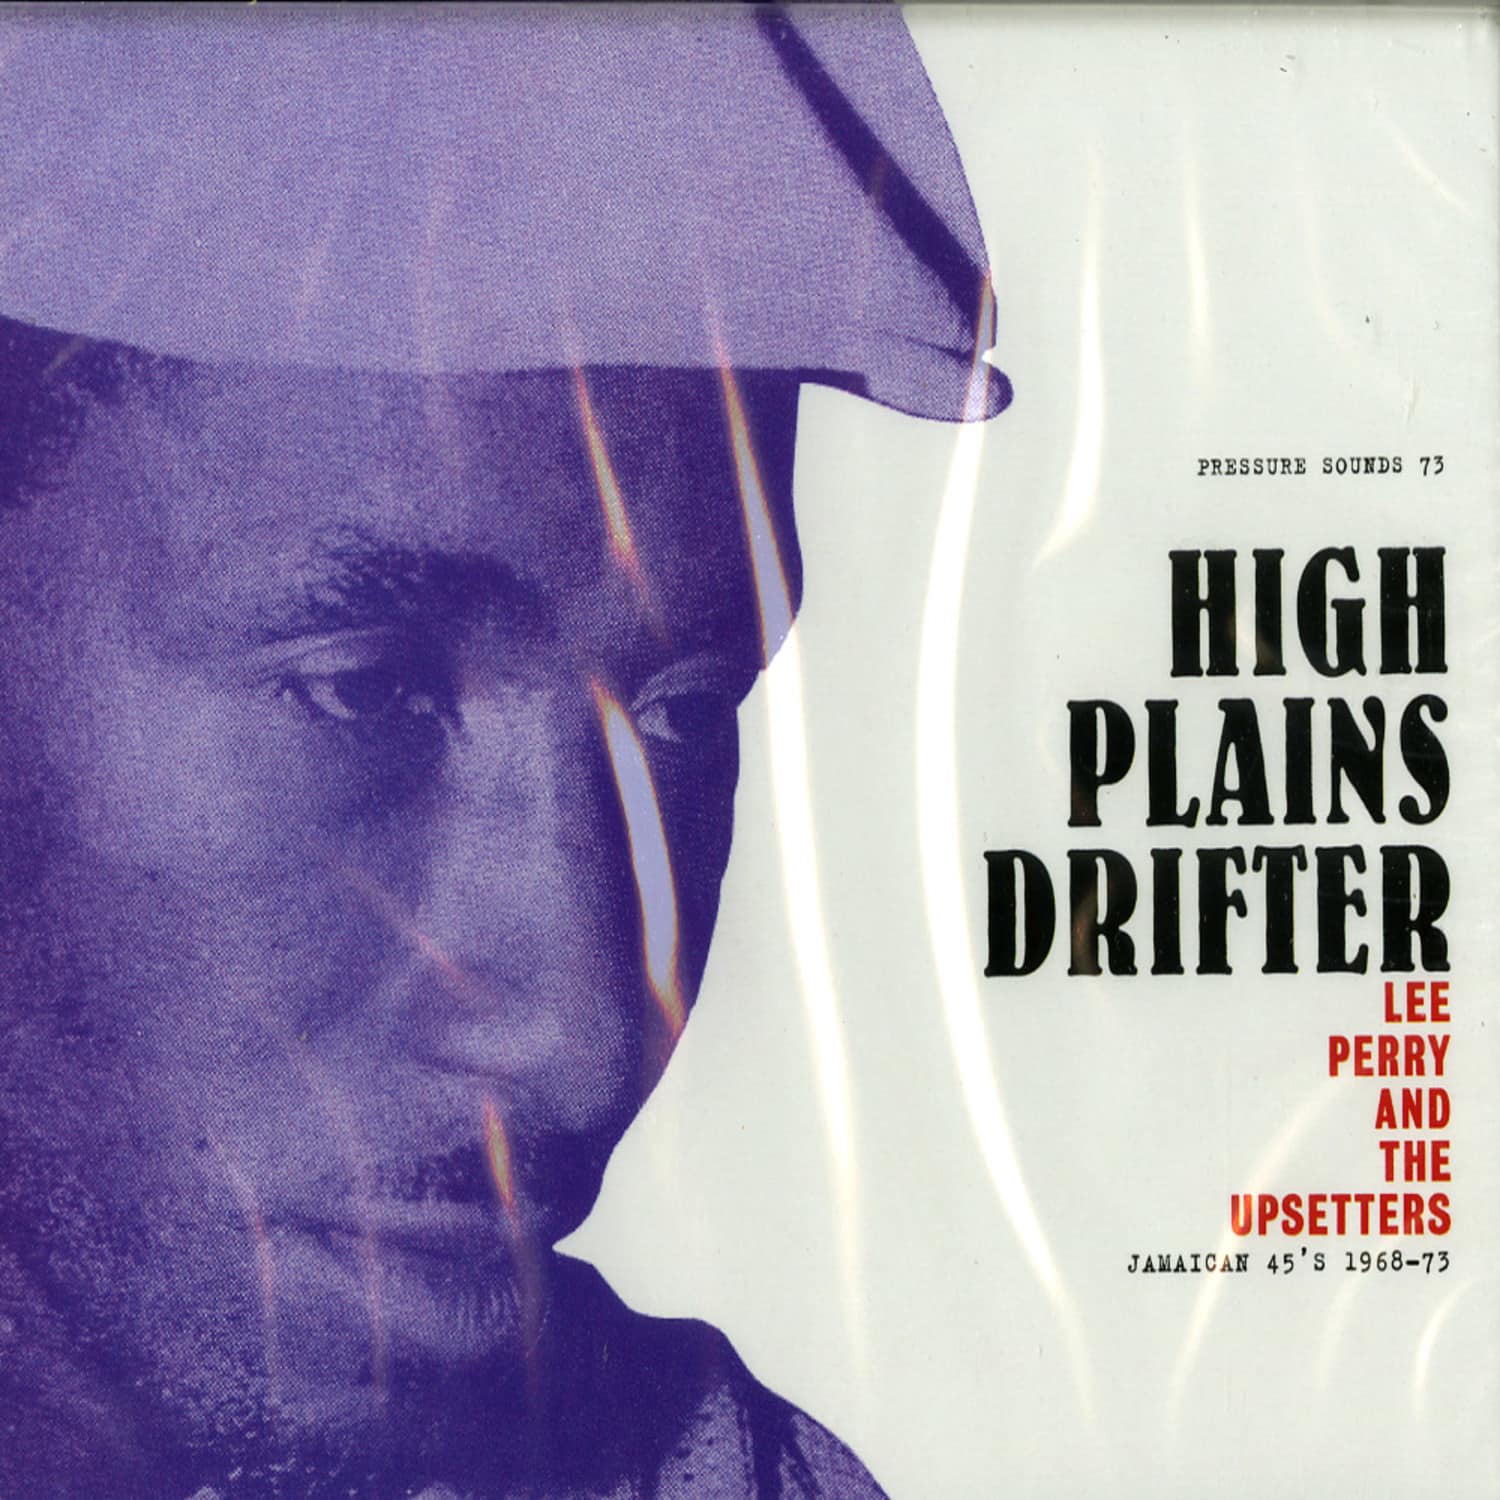 Lee Perry & The Upsetters - HIGH PLAINS DRIFTER 